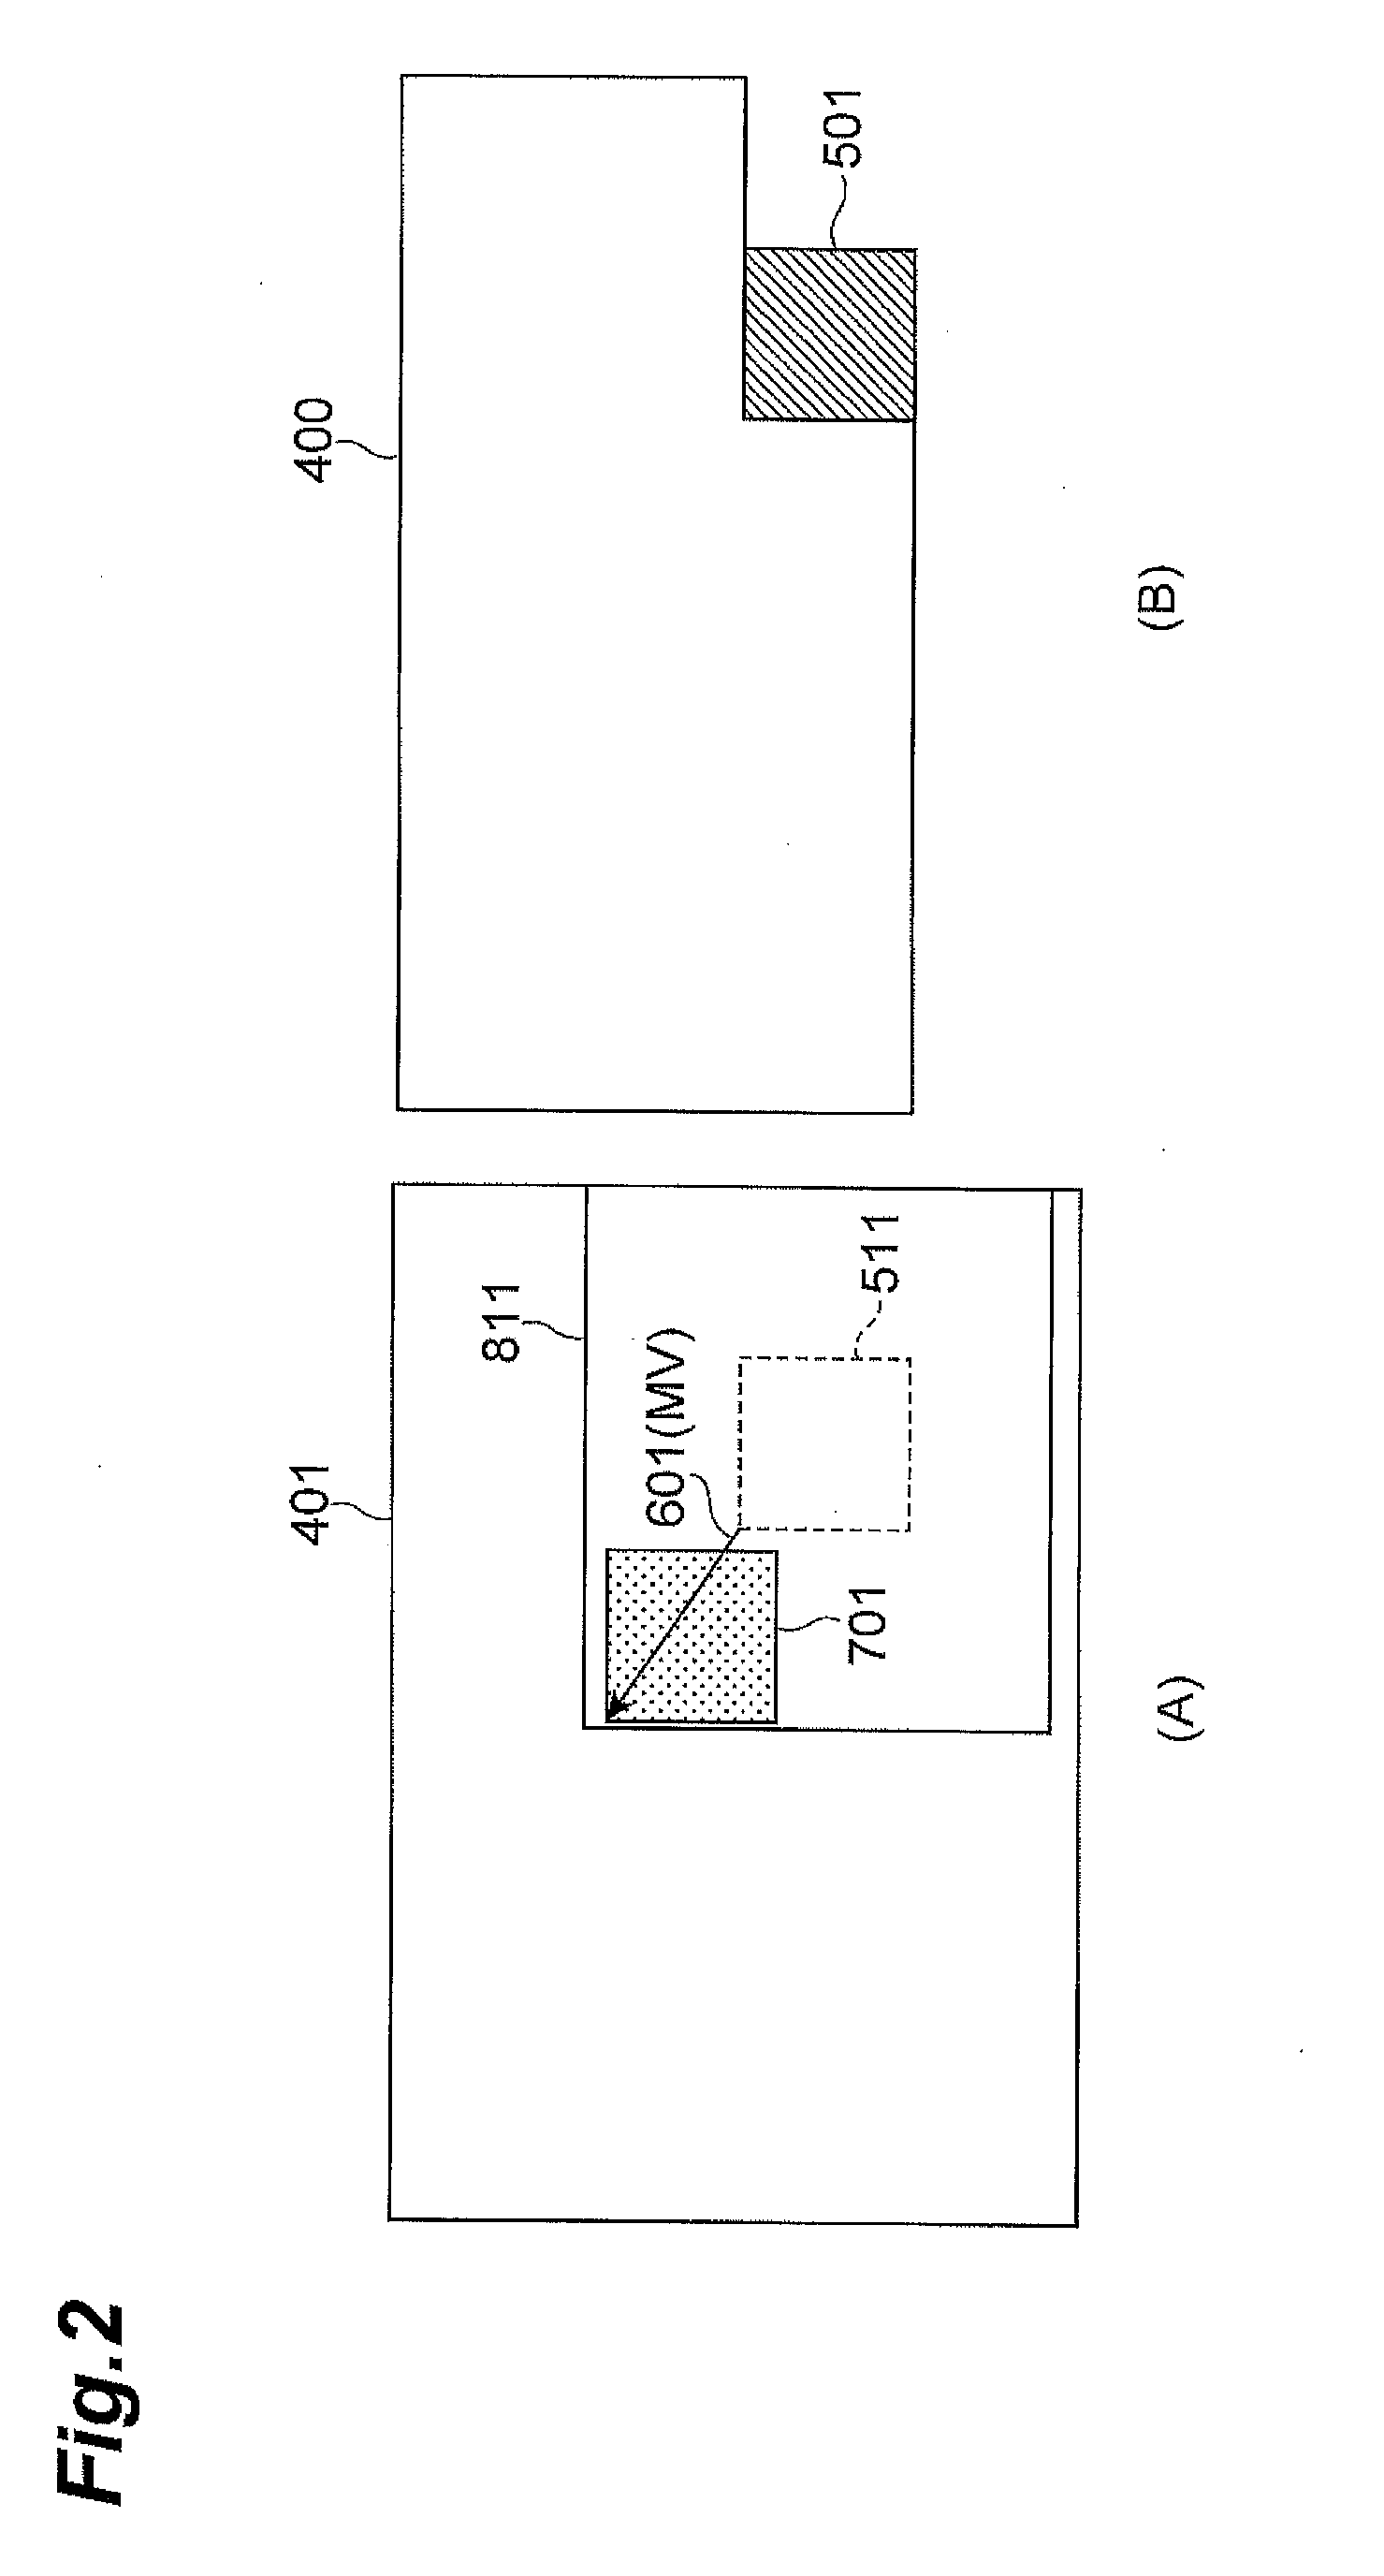 Moving image encoding and decoding system